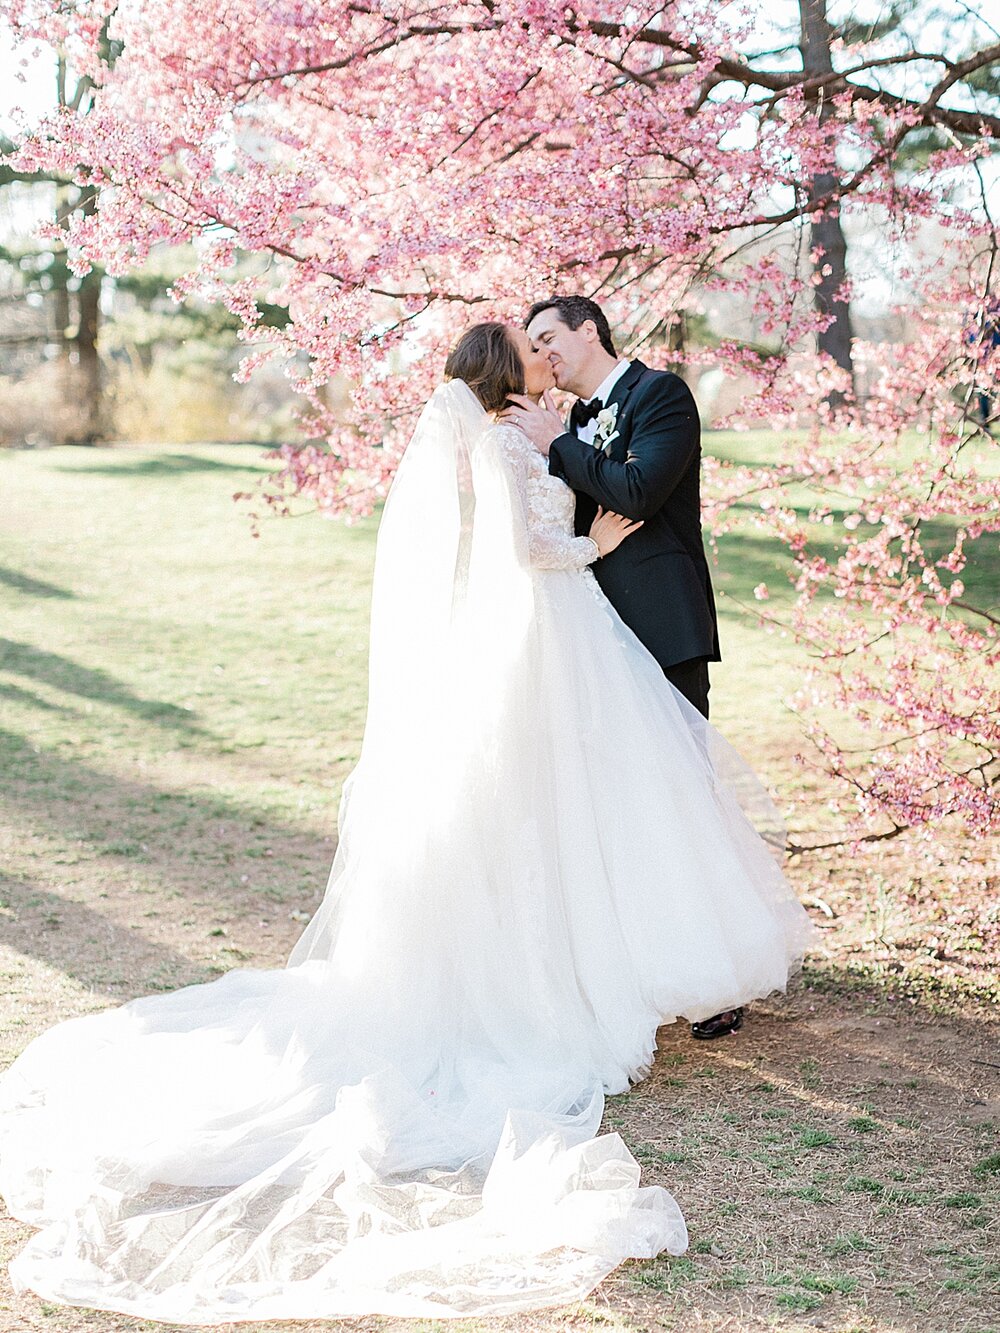 spring wedding portraits in Central Park | Tri-State area wedding venues photographed by Asher Gardner Photography